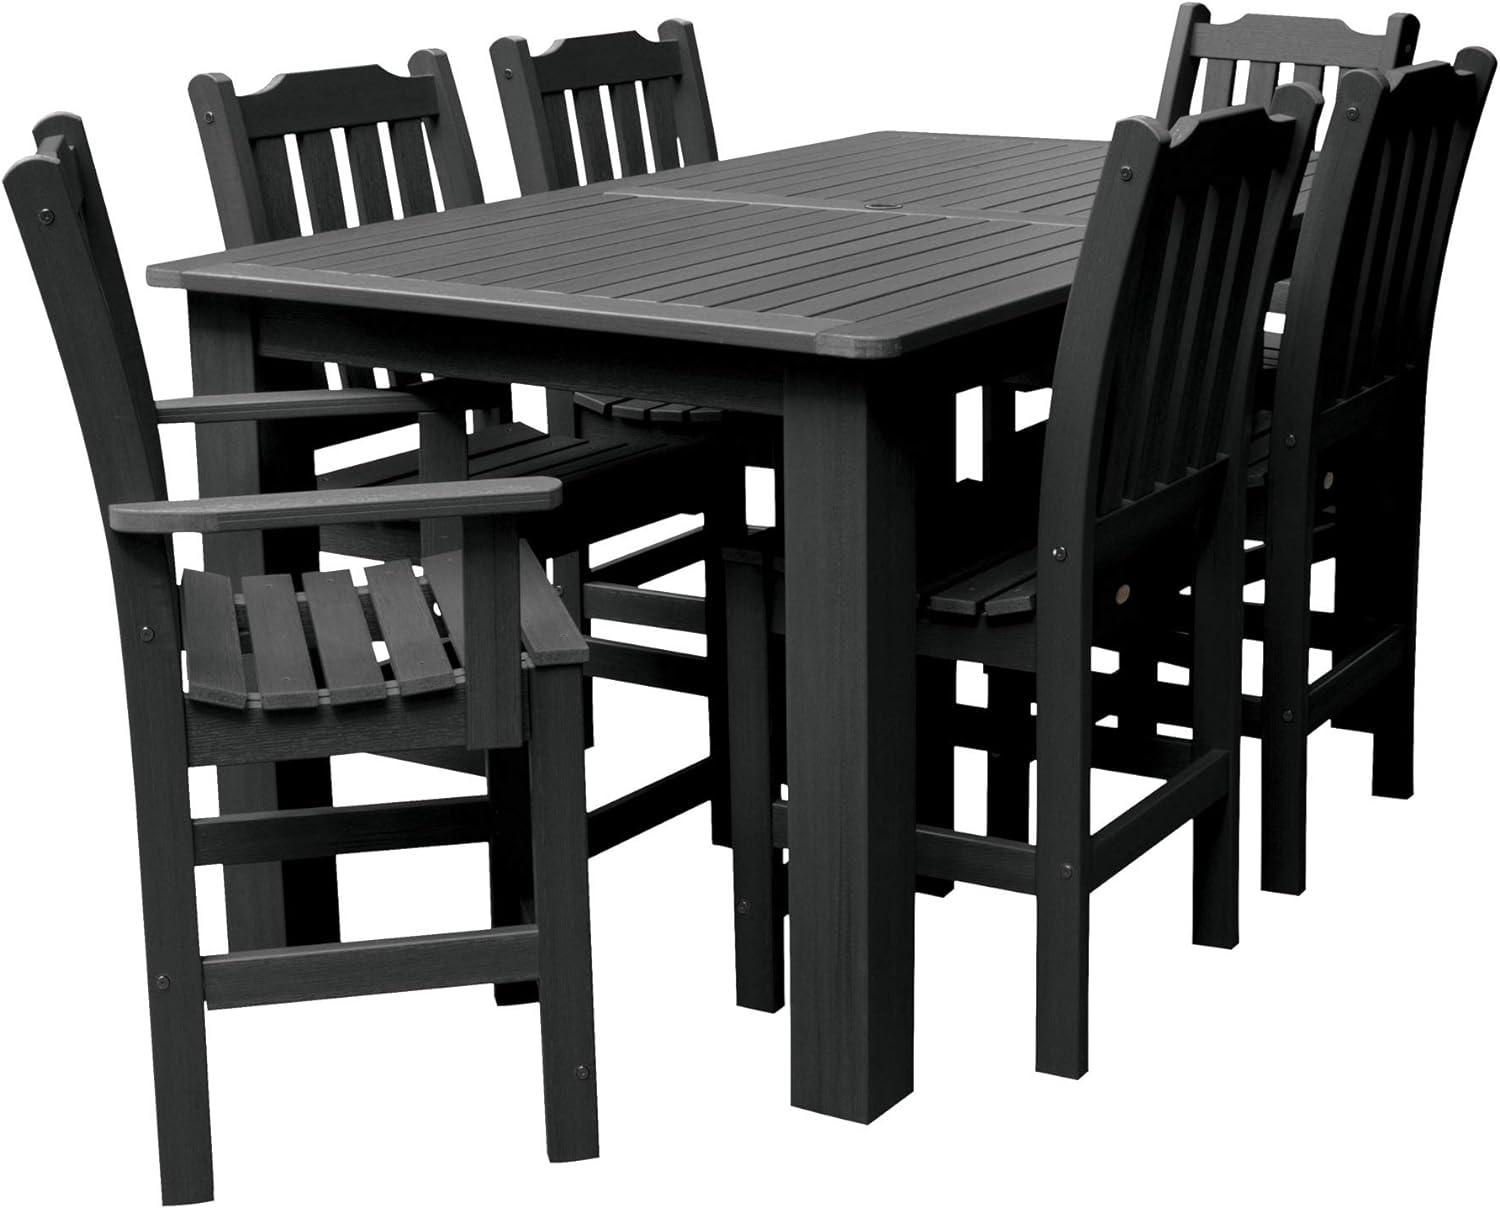 Lehigh Black Bamboo 7-Piece Outdoor Dining Set for 6